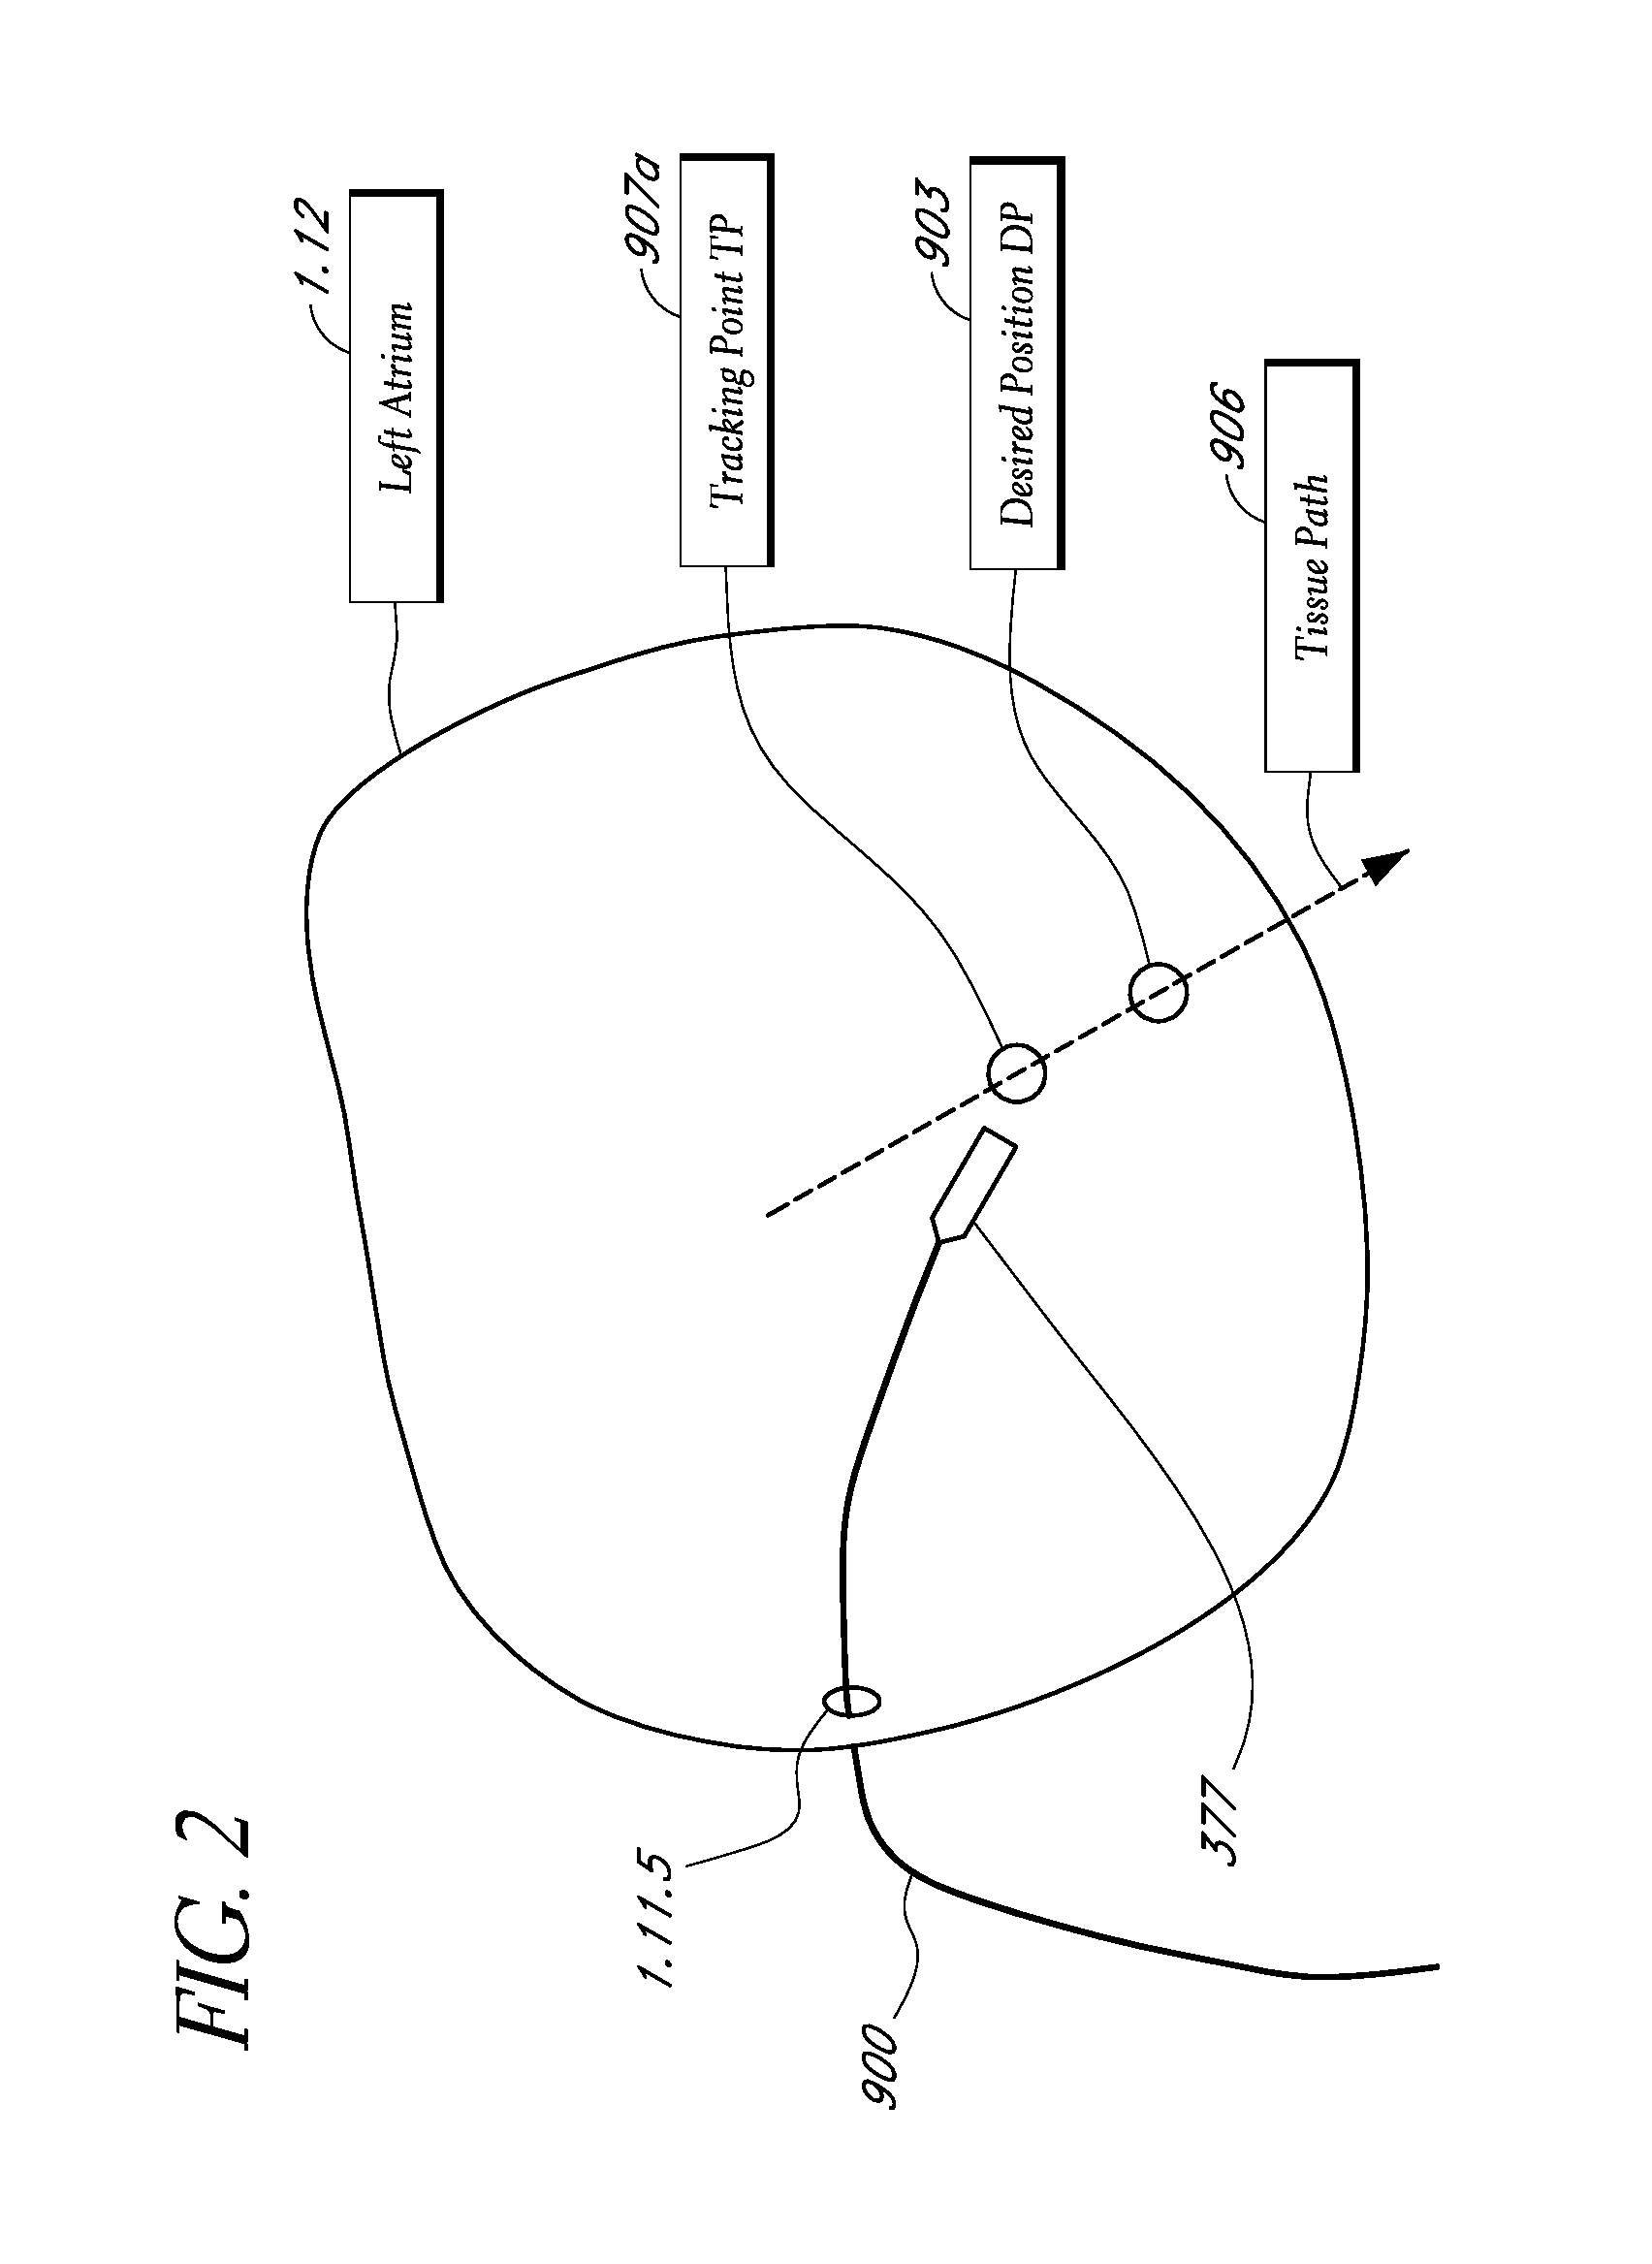 Method and apparatus for creating a high resolution map of the electrical and mechanical properties of the heart